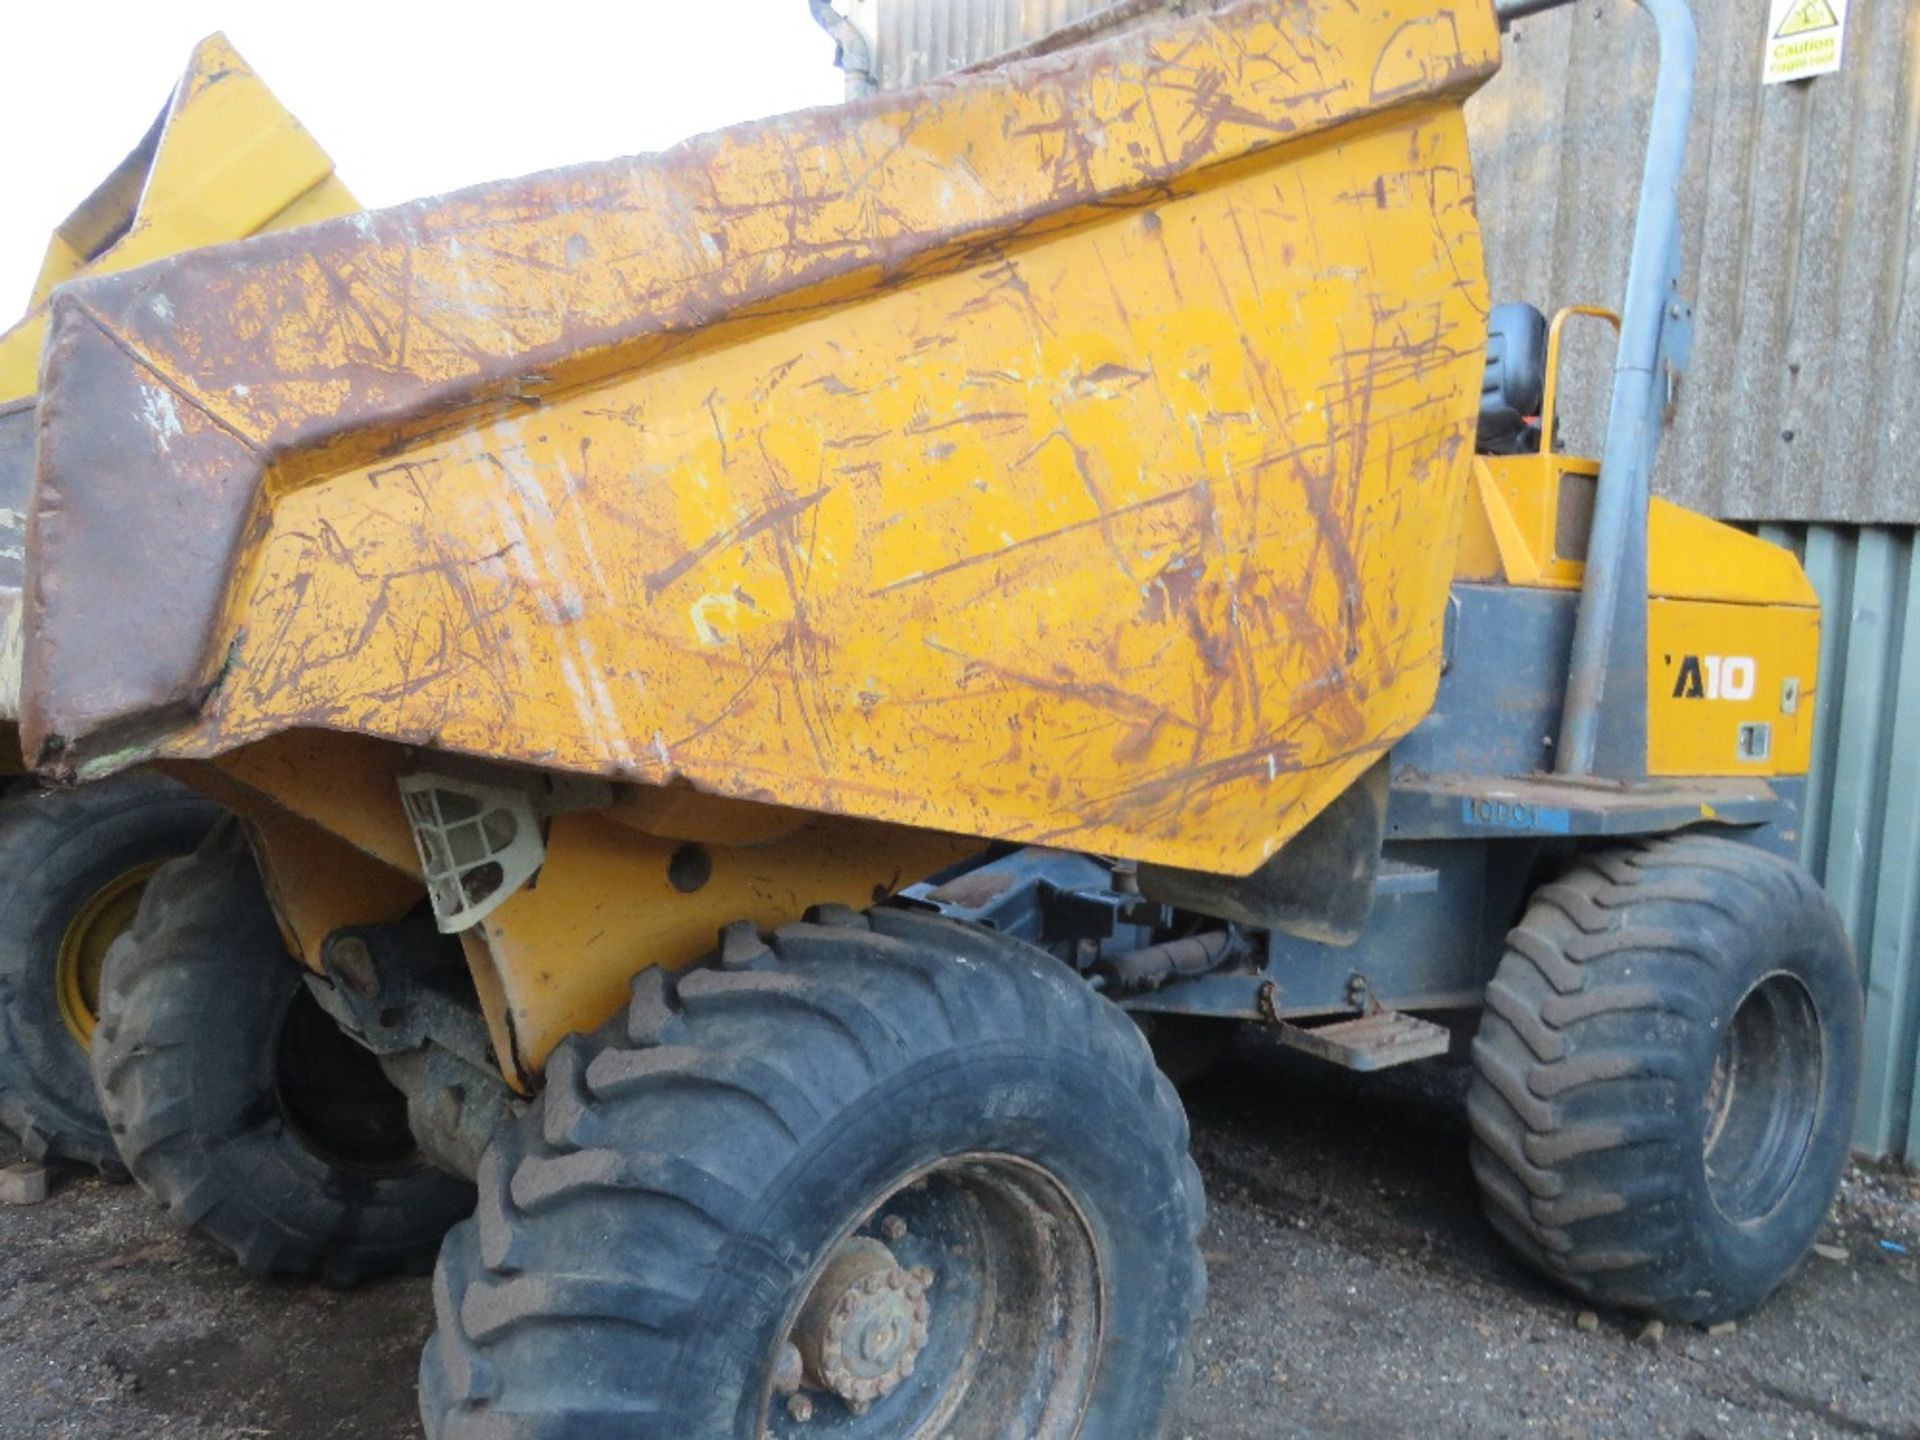 TEREX TA10 10 TONNE DUMPER, YEAR 2008 BUILD, PN:10D01, 4873 REC HOURS. WHEN TESTED WAS SEEN TO DRIV